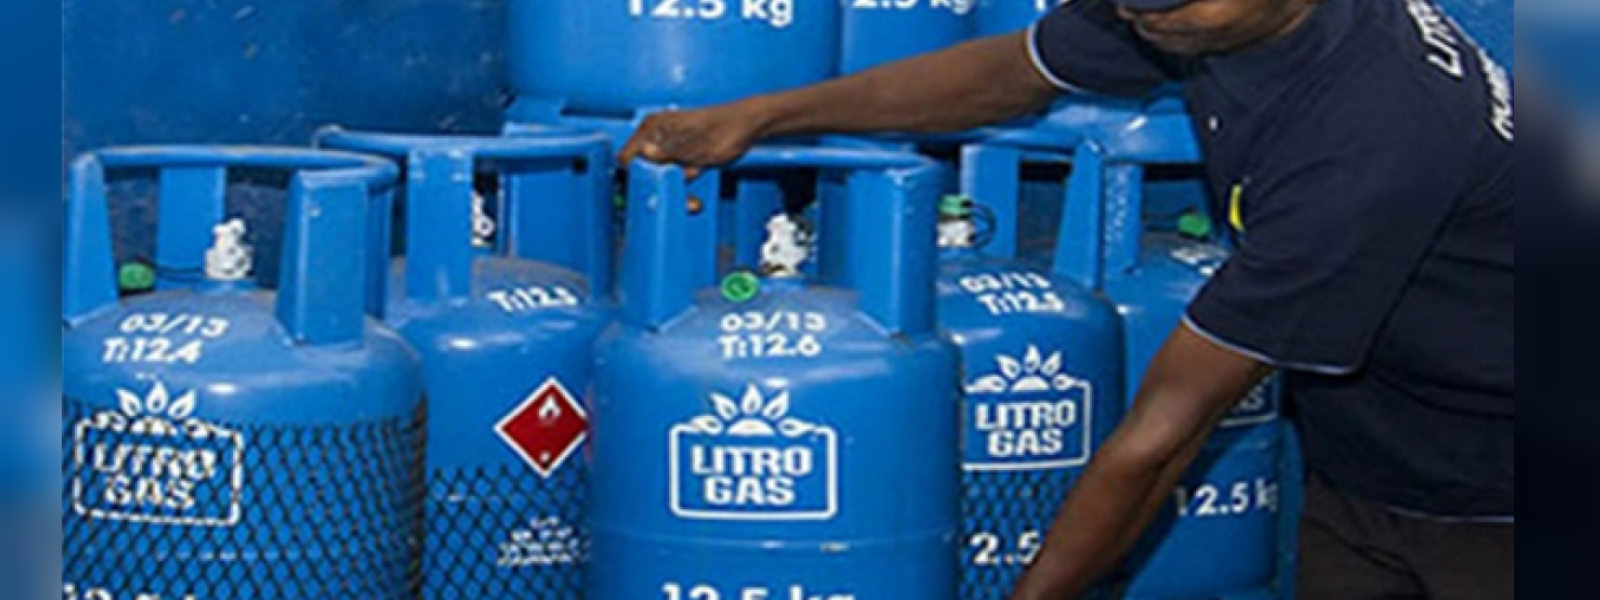 700,000 Gas cylinders issued to the market: Litro